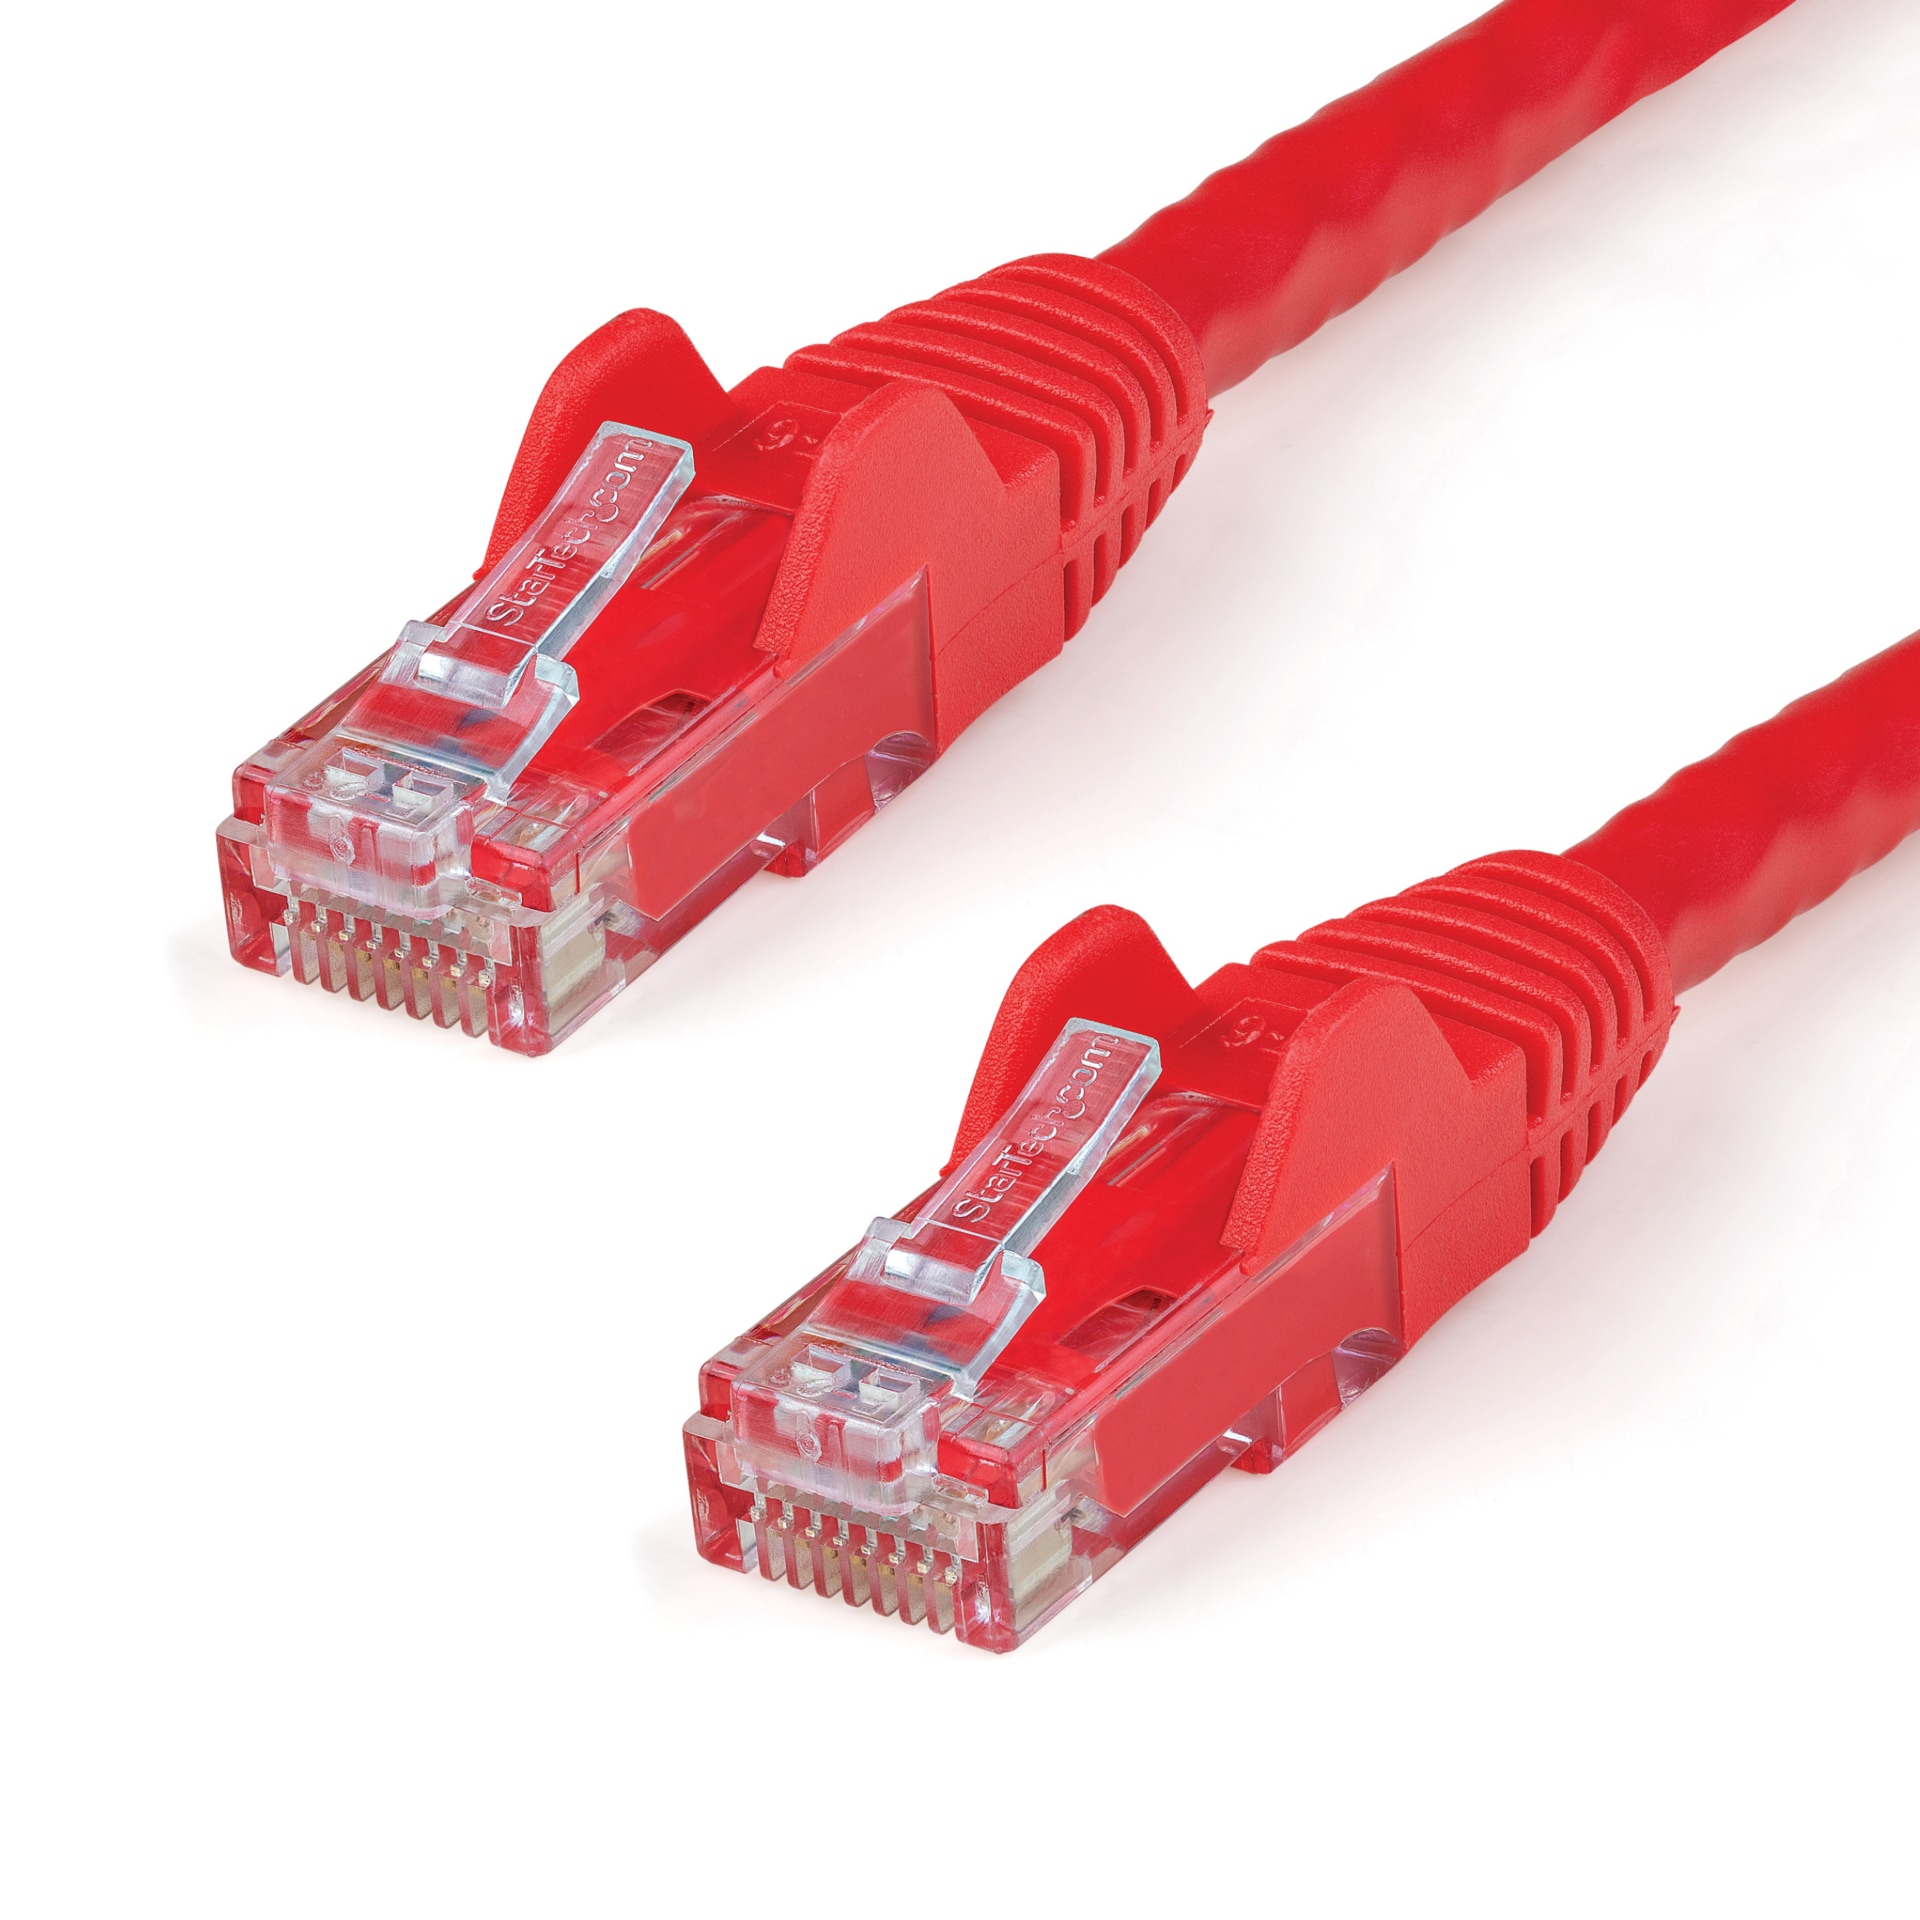 StarTech.com 100ft CAT6 Ethernet Cable - Red Snagless Gigabit - 100W PoE UTP 650MHz Category 6 Patch Cord UL Certified